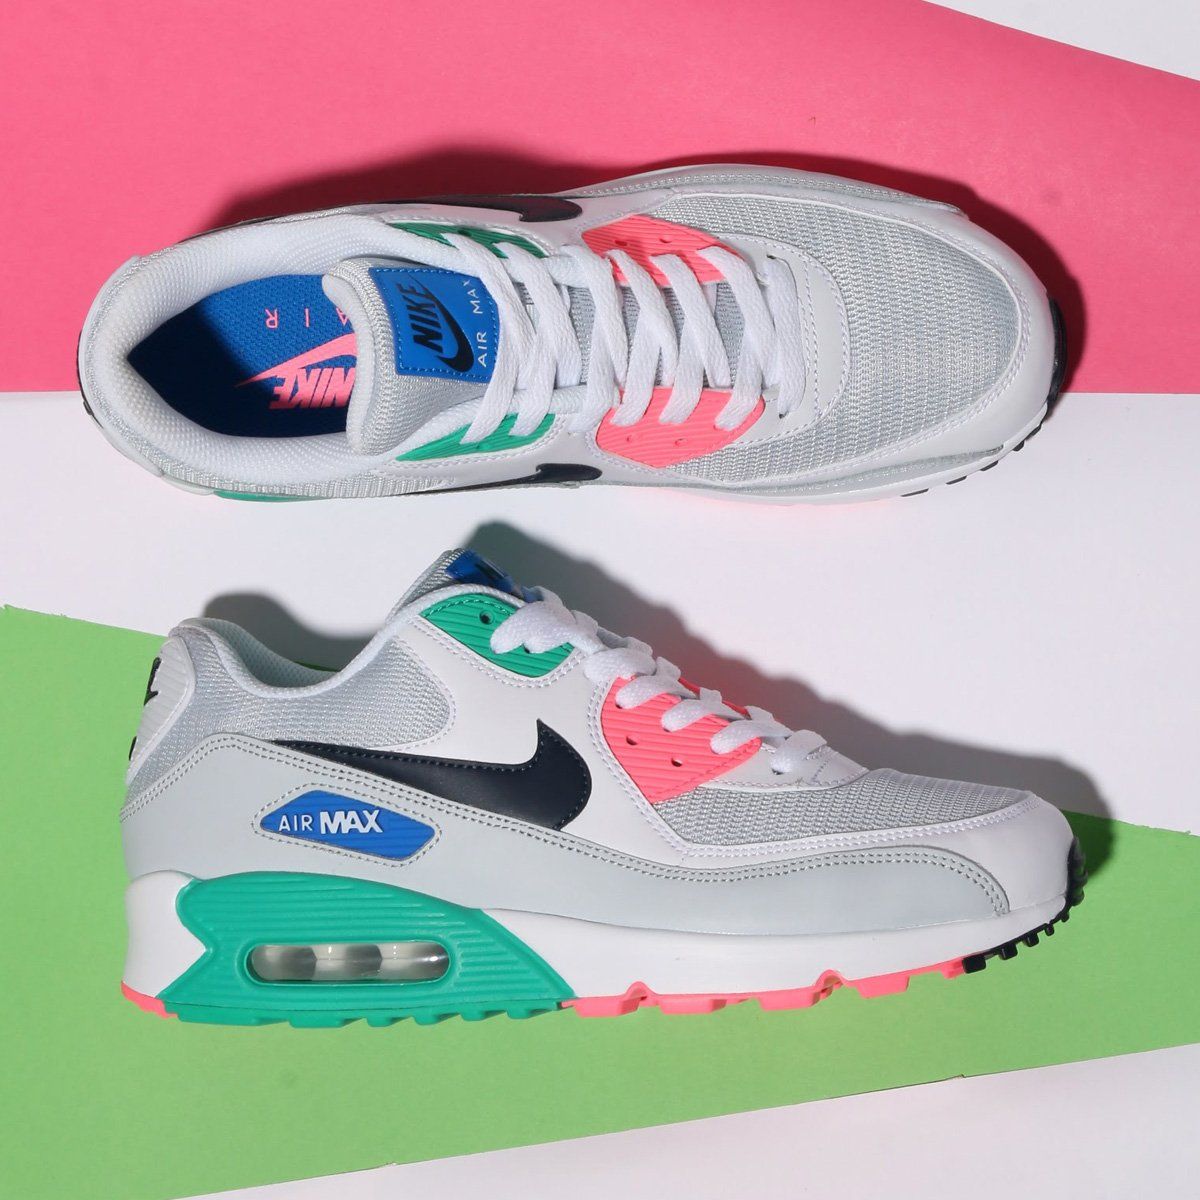 SALE: Nike Air Max 90 ‘Summer Sea' on sale for $84.98 + shipping, use code SOLSTICE5 => bit.ly/2q6EKg4